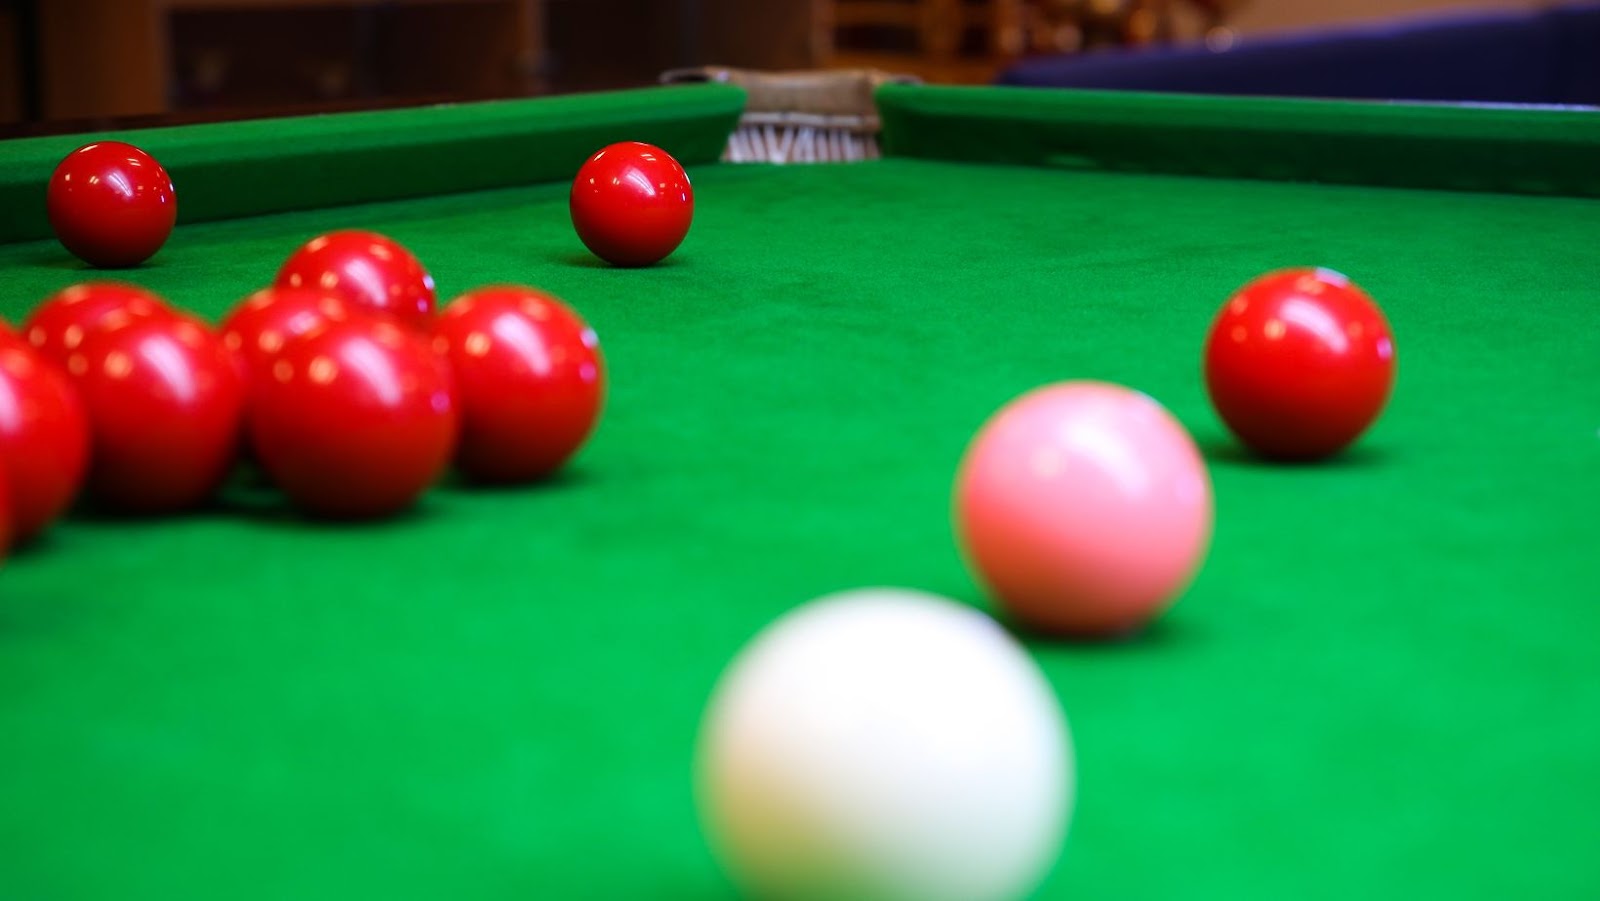 The Dimensions of a Snooker Table